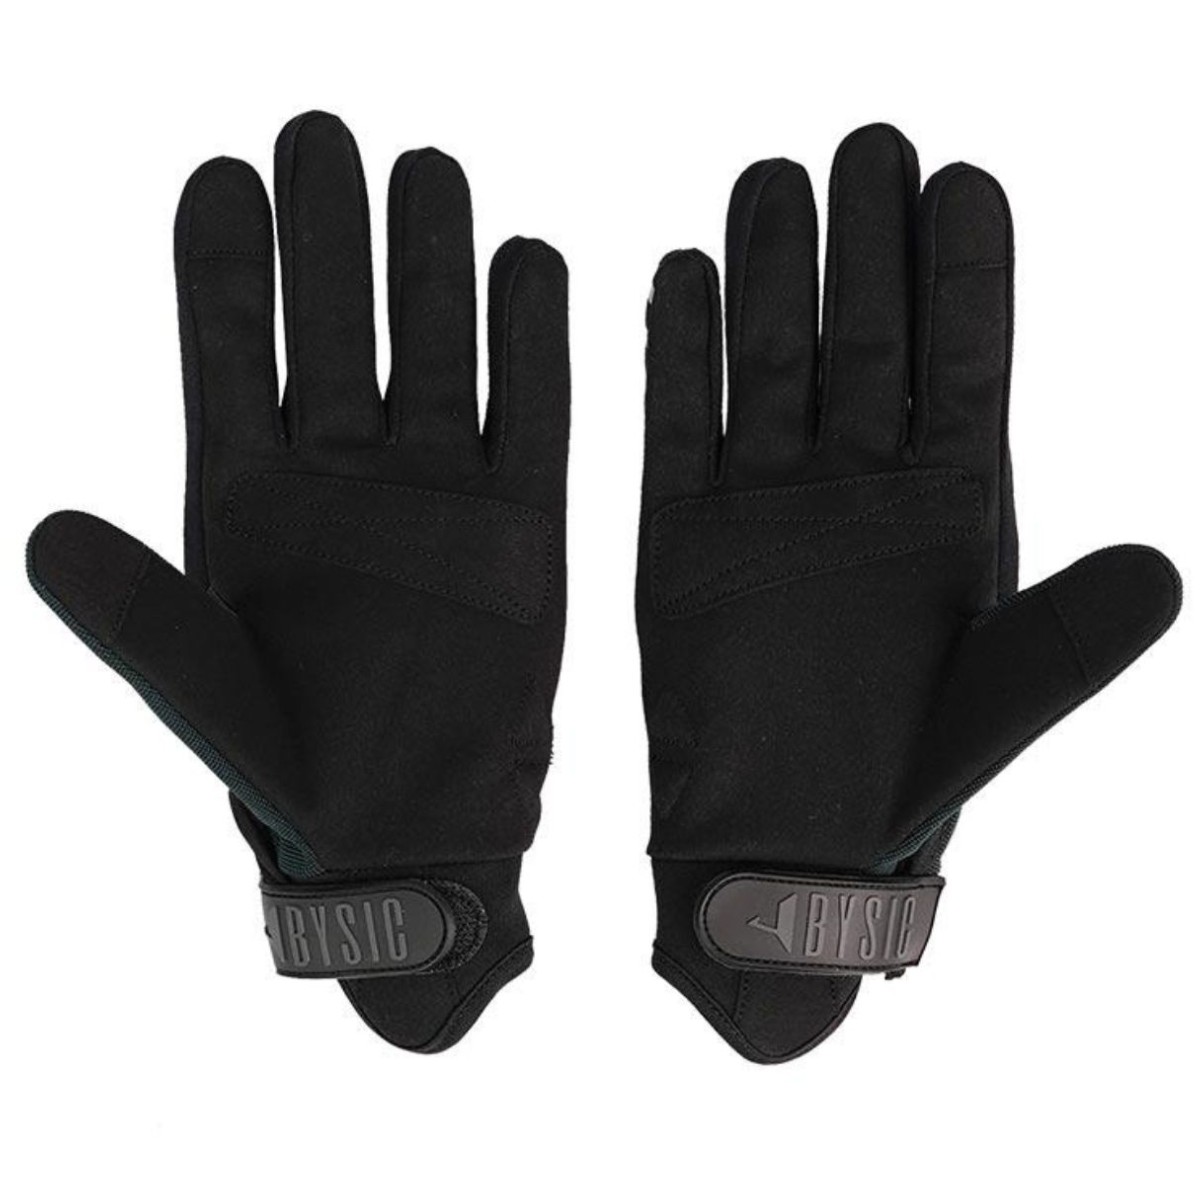 1000172 guantes by city verano moscow man verde 1